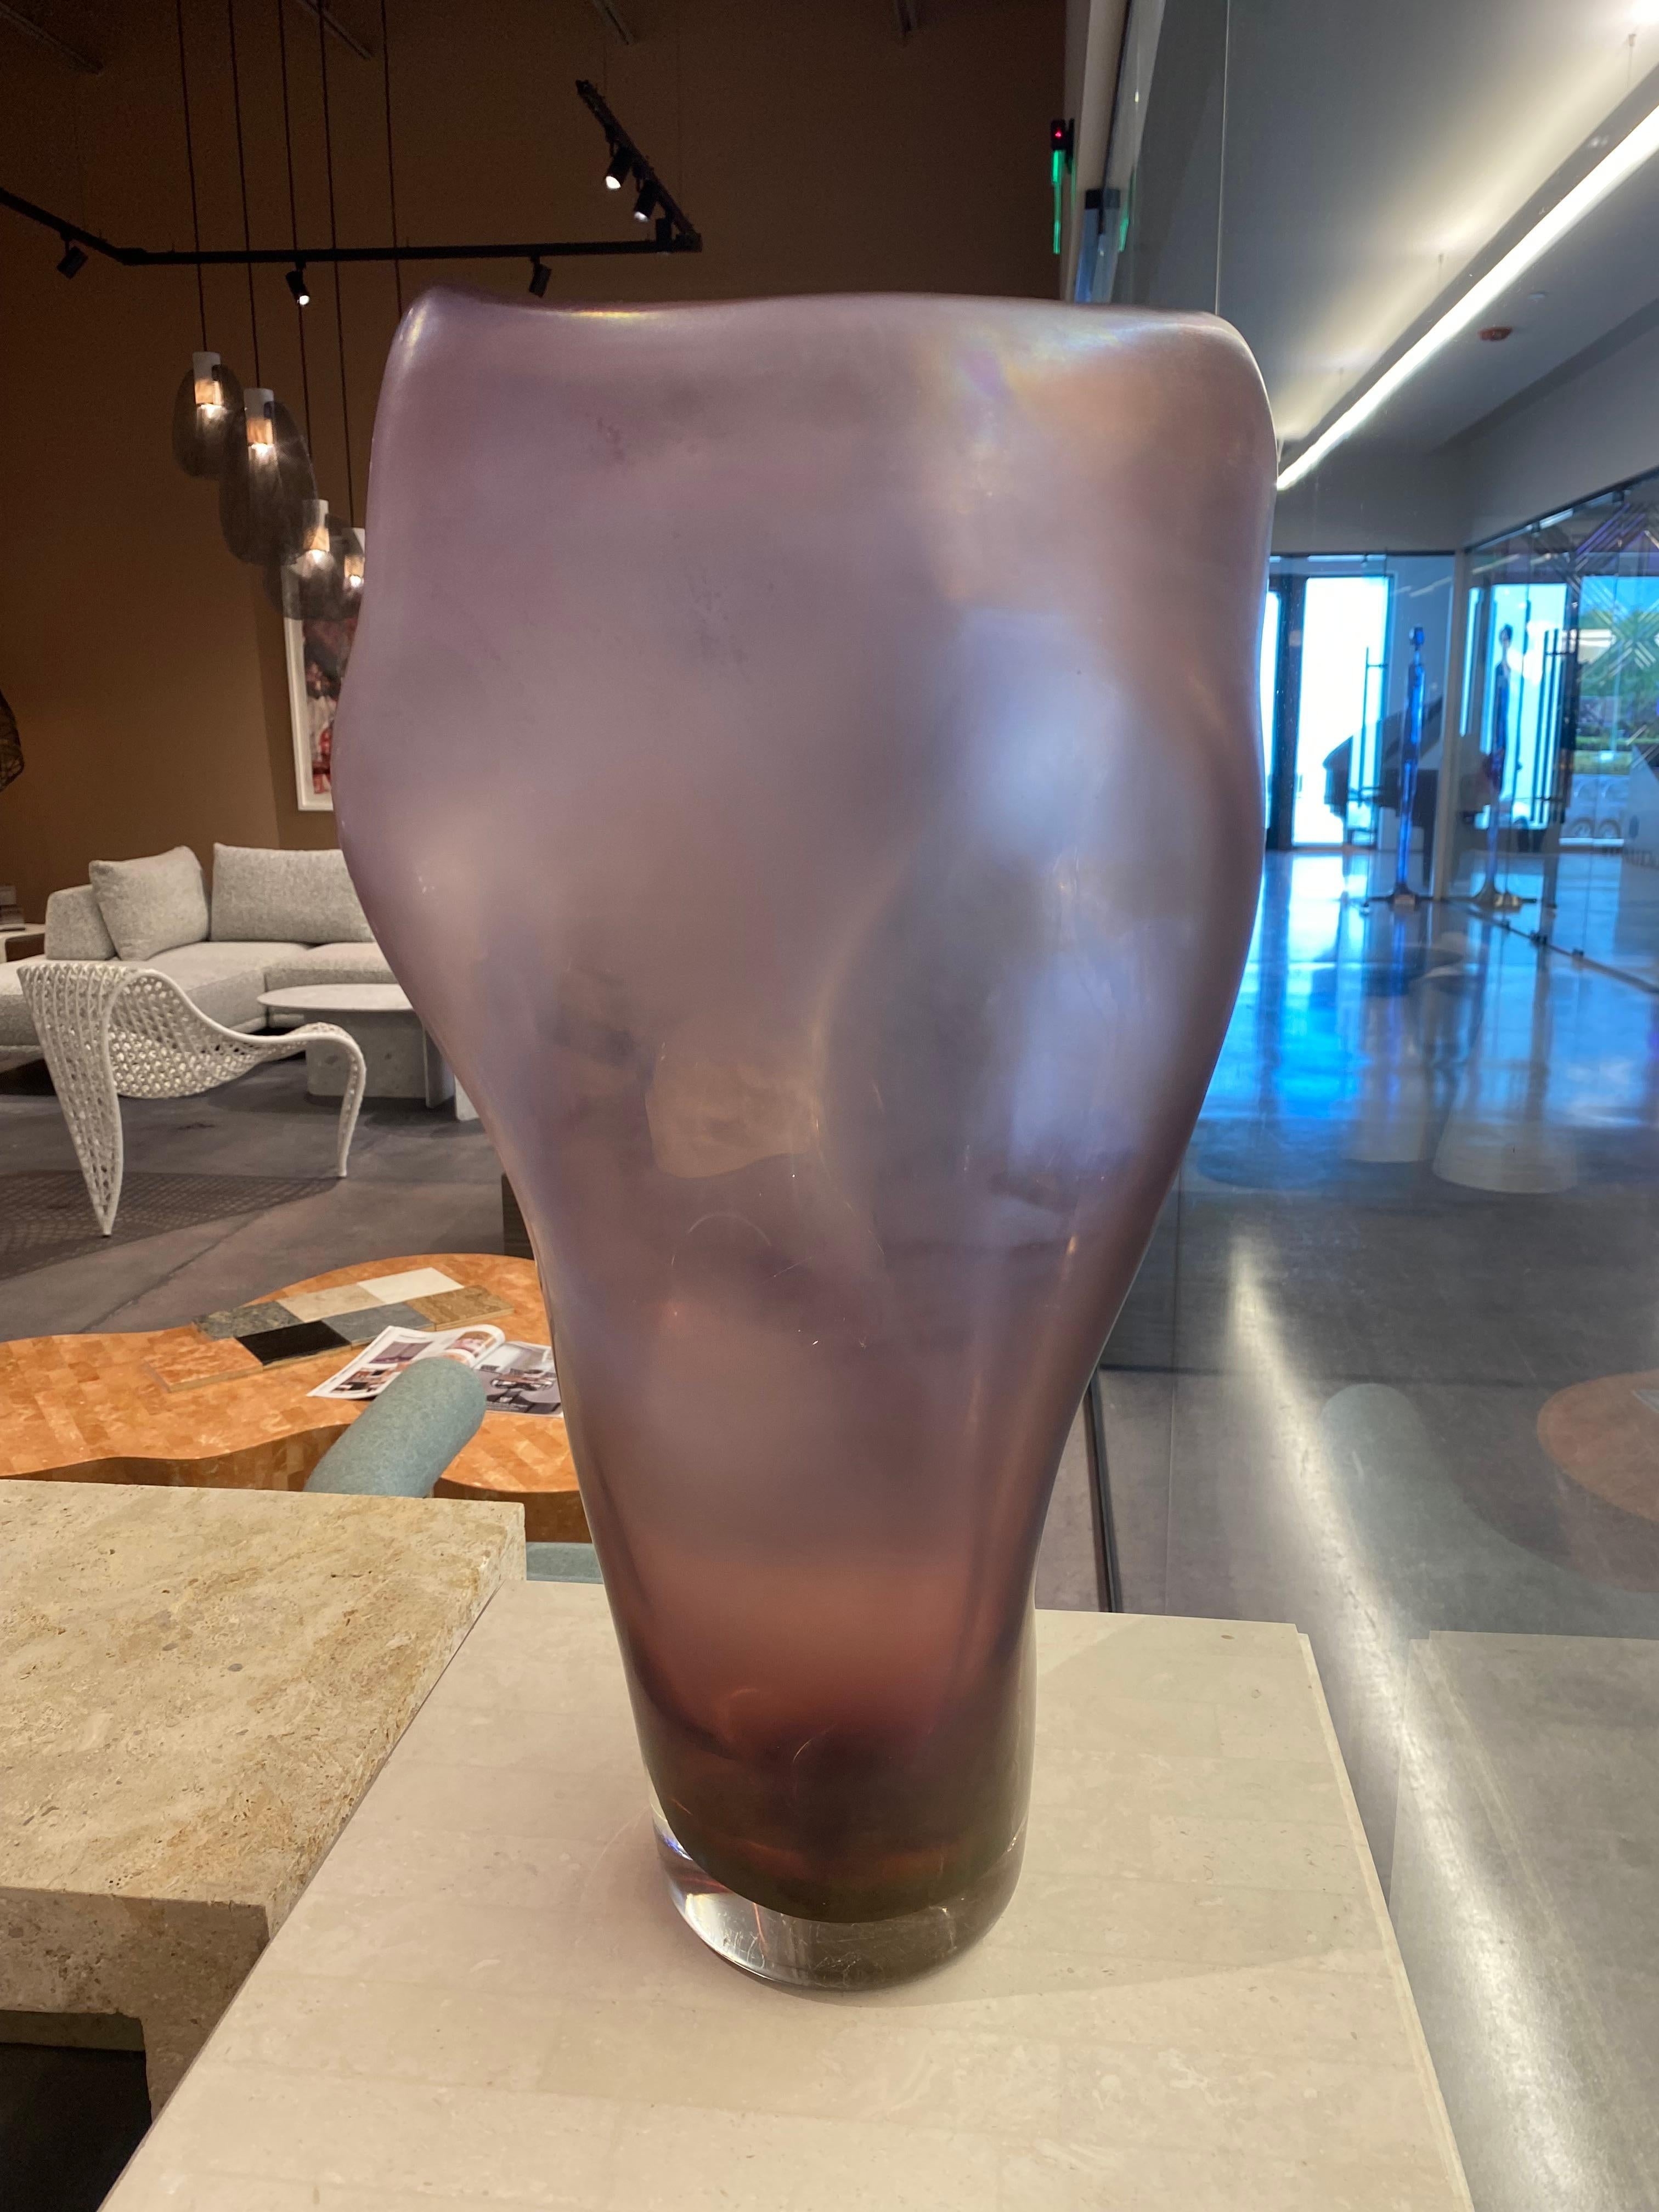 The ALLUNGATO vase is made by Massimo Micheluzzi using the process of Iridazione (to make a surface iridescent) that gives the glass a visual pearl-like effect. This chemical process is generated when the glass is still soft and